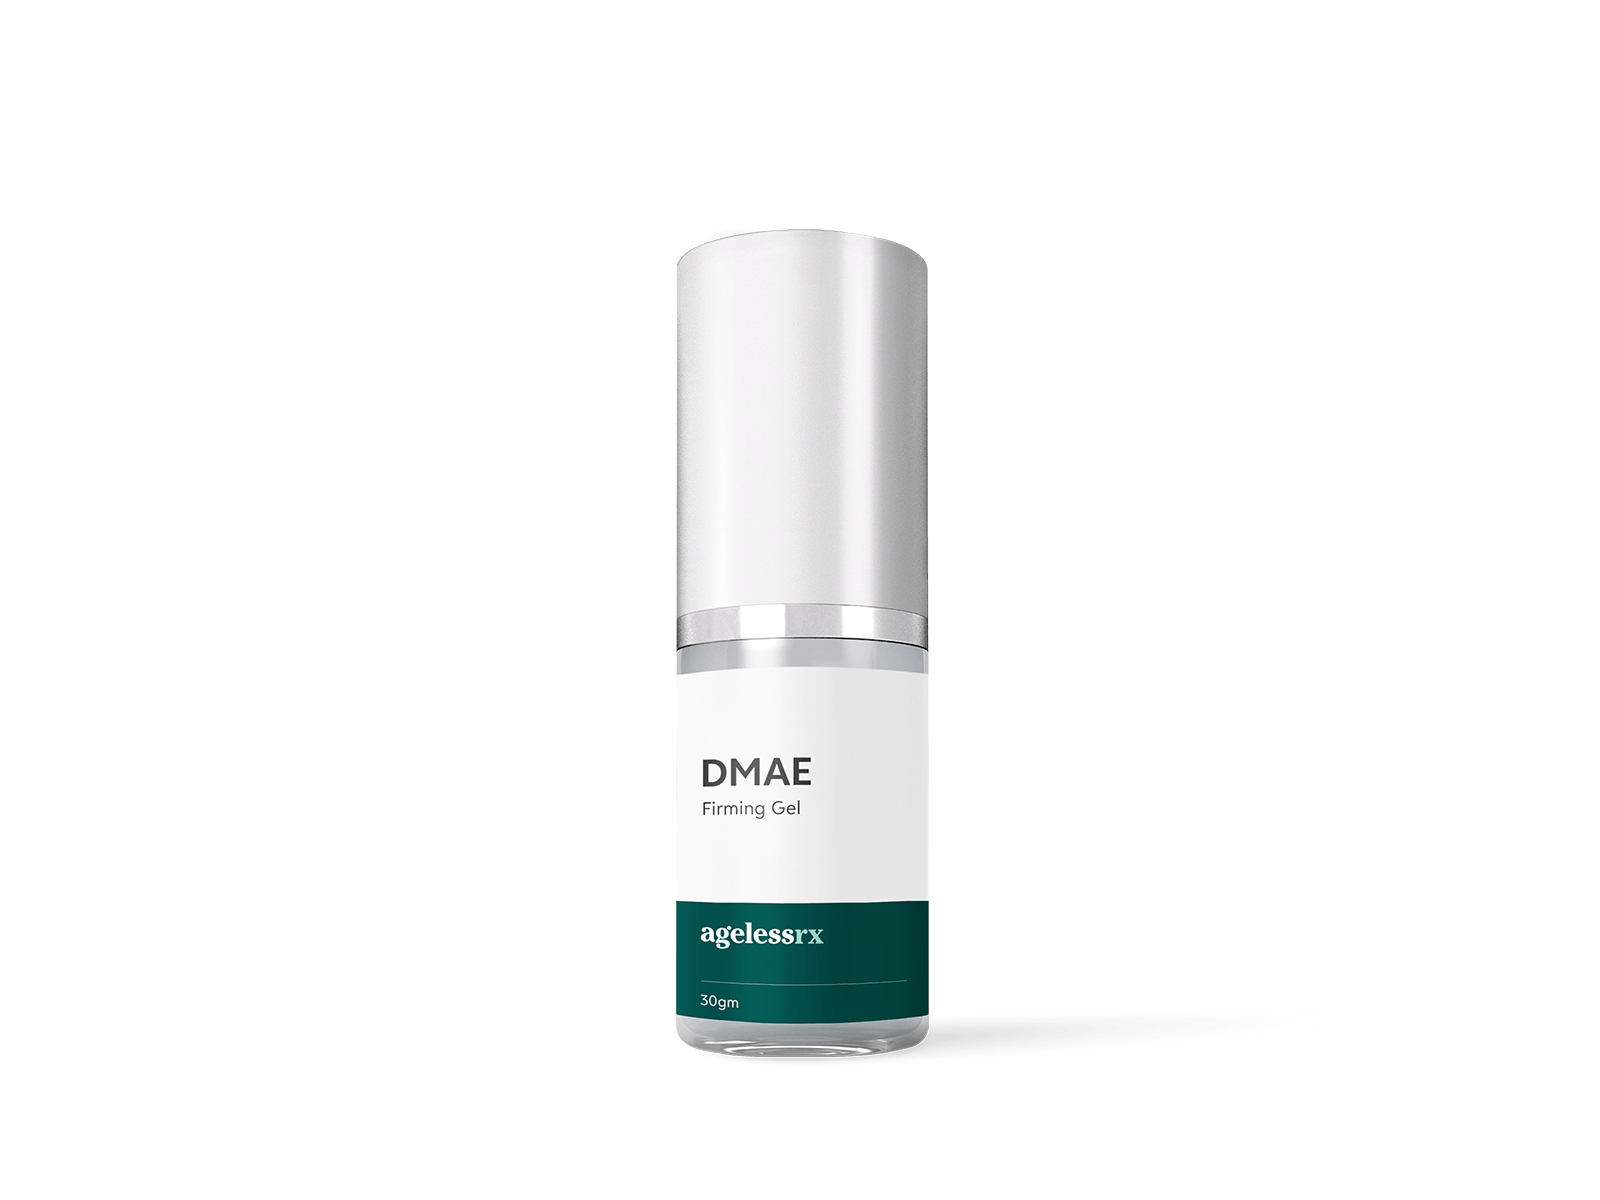 Product image for DMAE Firming Gel